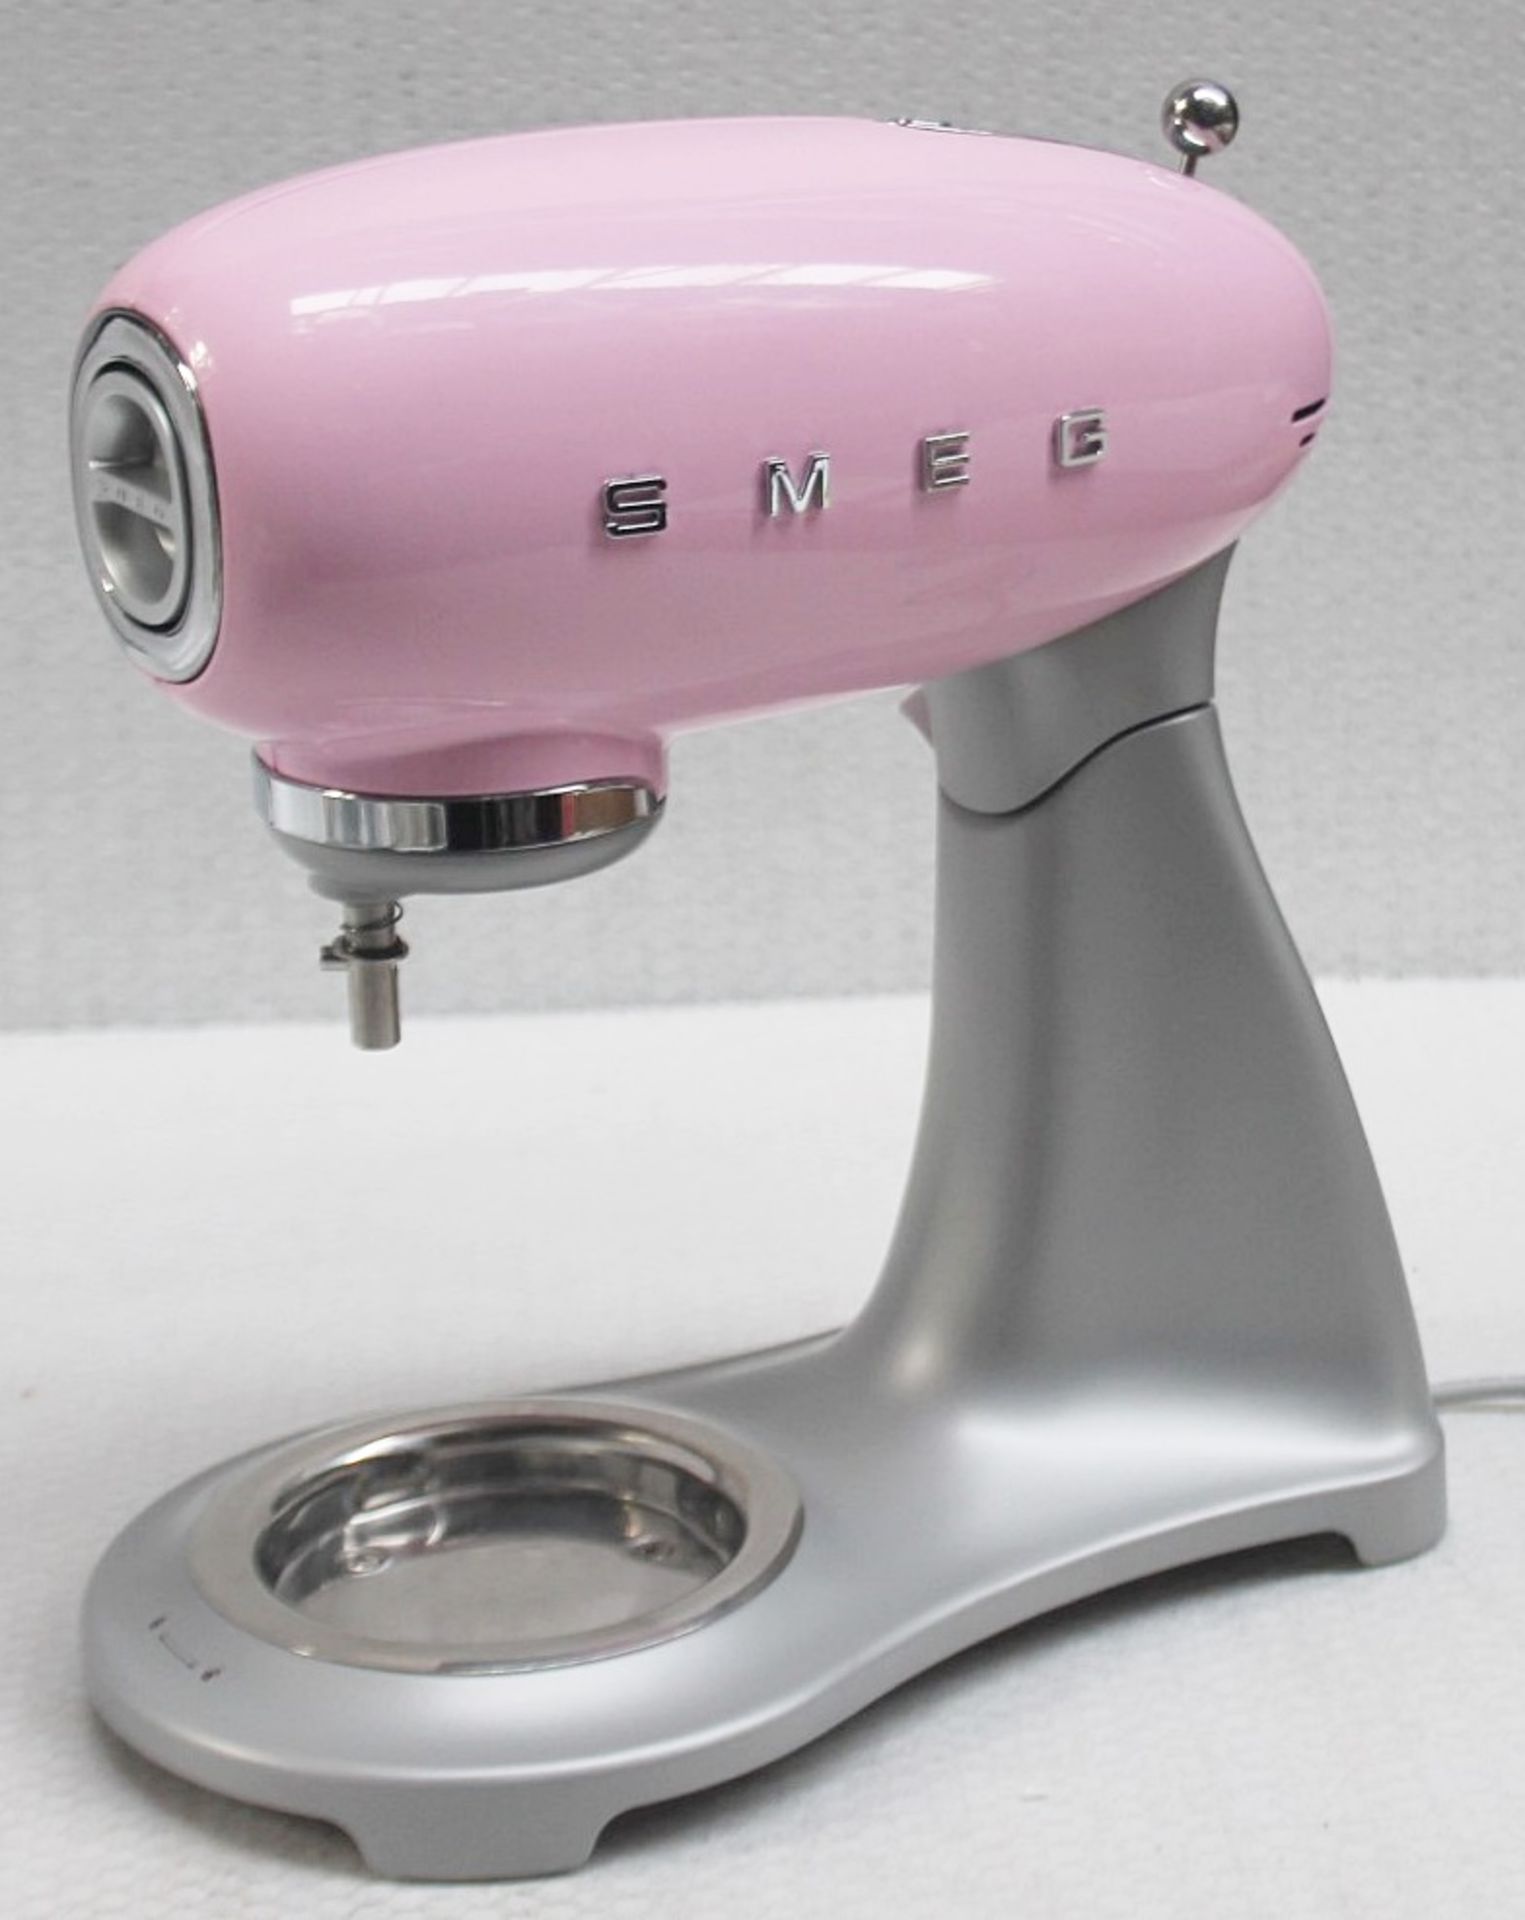 1 x SMEG 50's Retro Stand Mixer In Pink With 4.8 Litre Bowl And Accessories - RRP £499.00 - Image 2 of 14